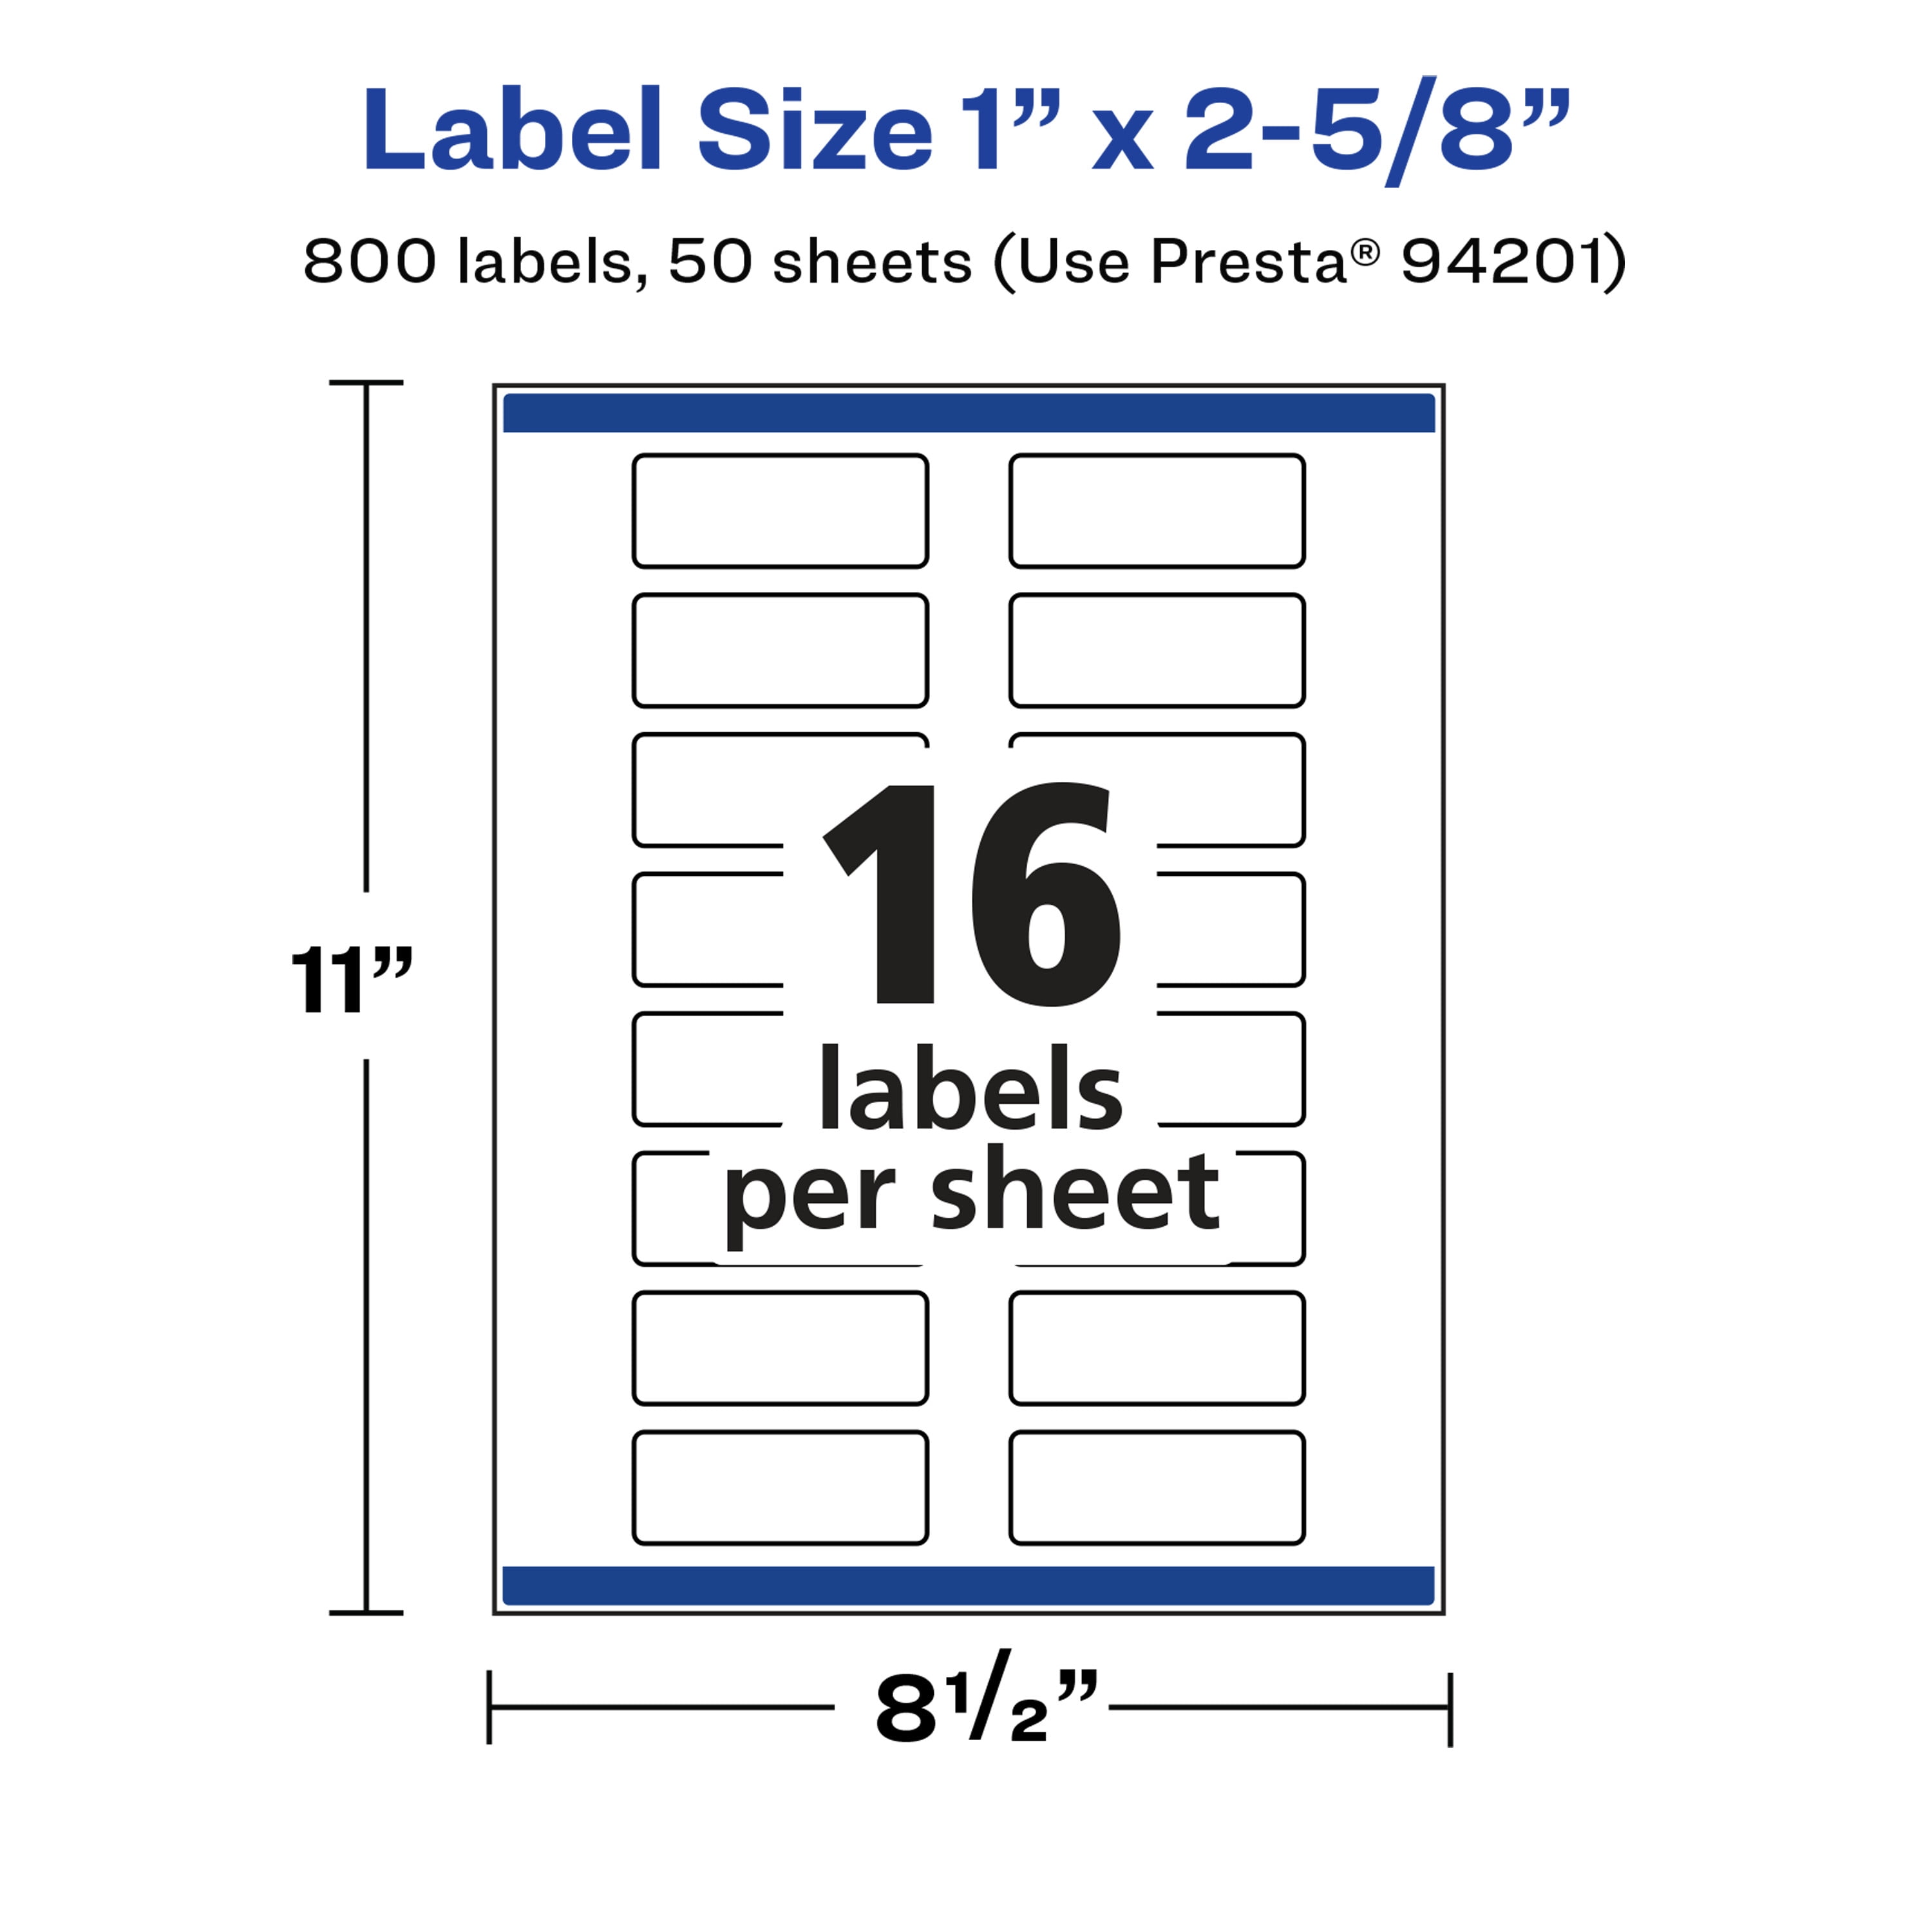 Custom Nutrition Rectangle Labels - Glossy White - 8 Qty - Avery